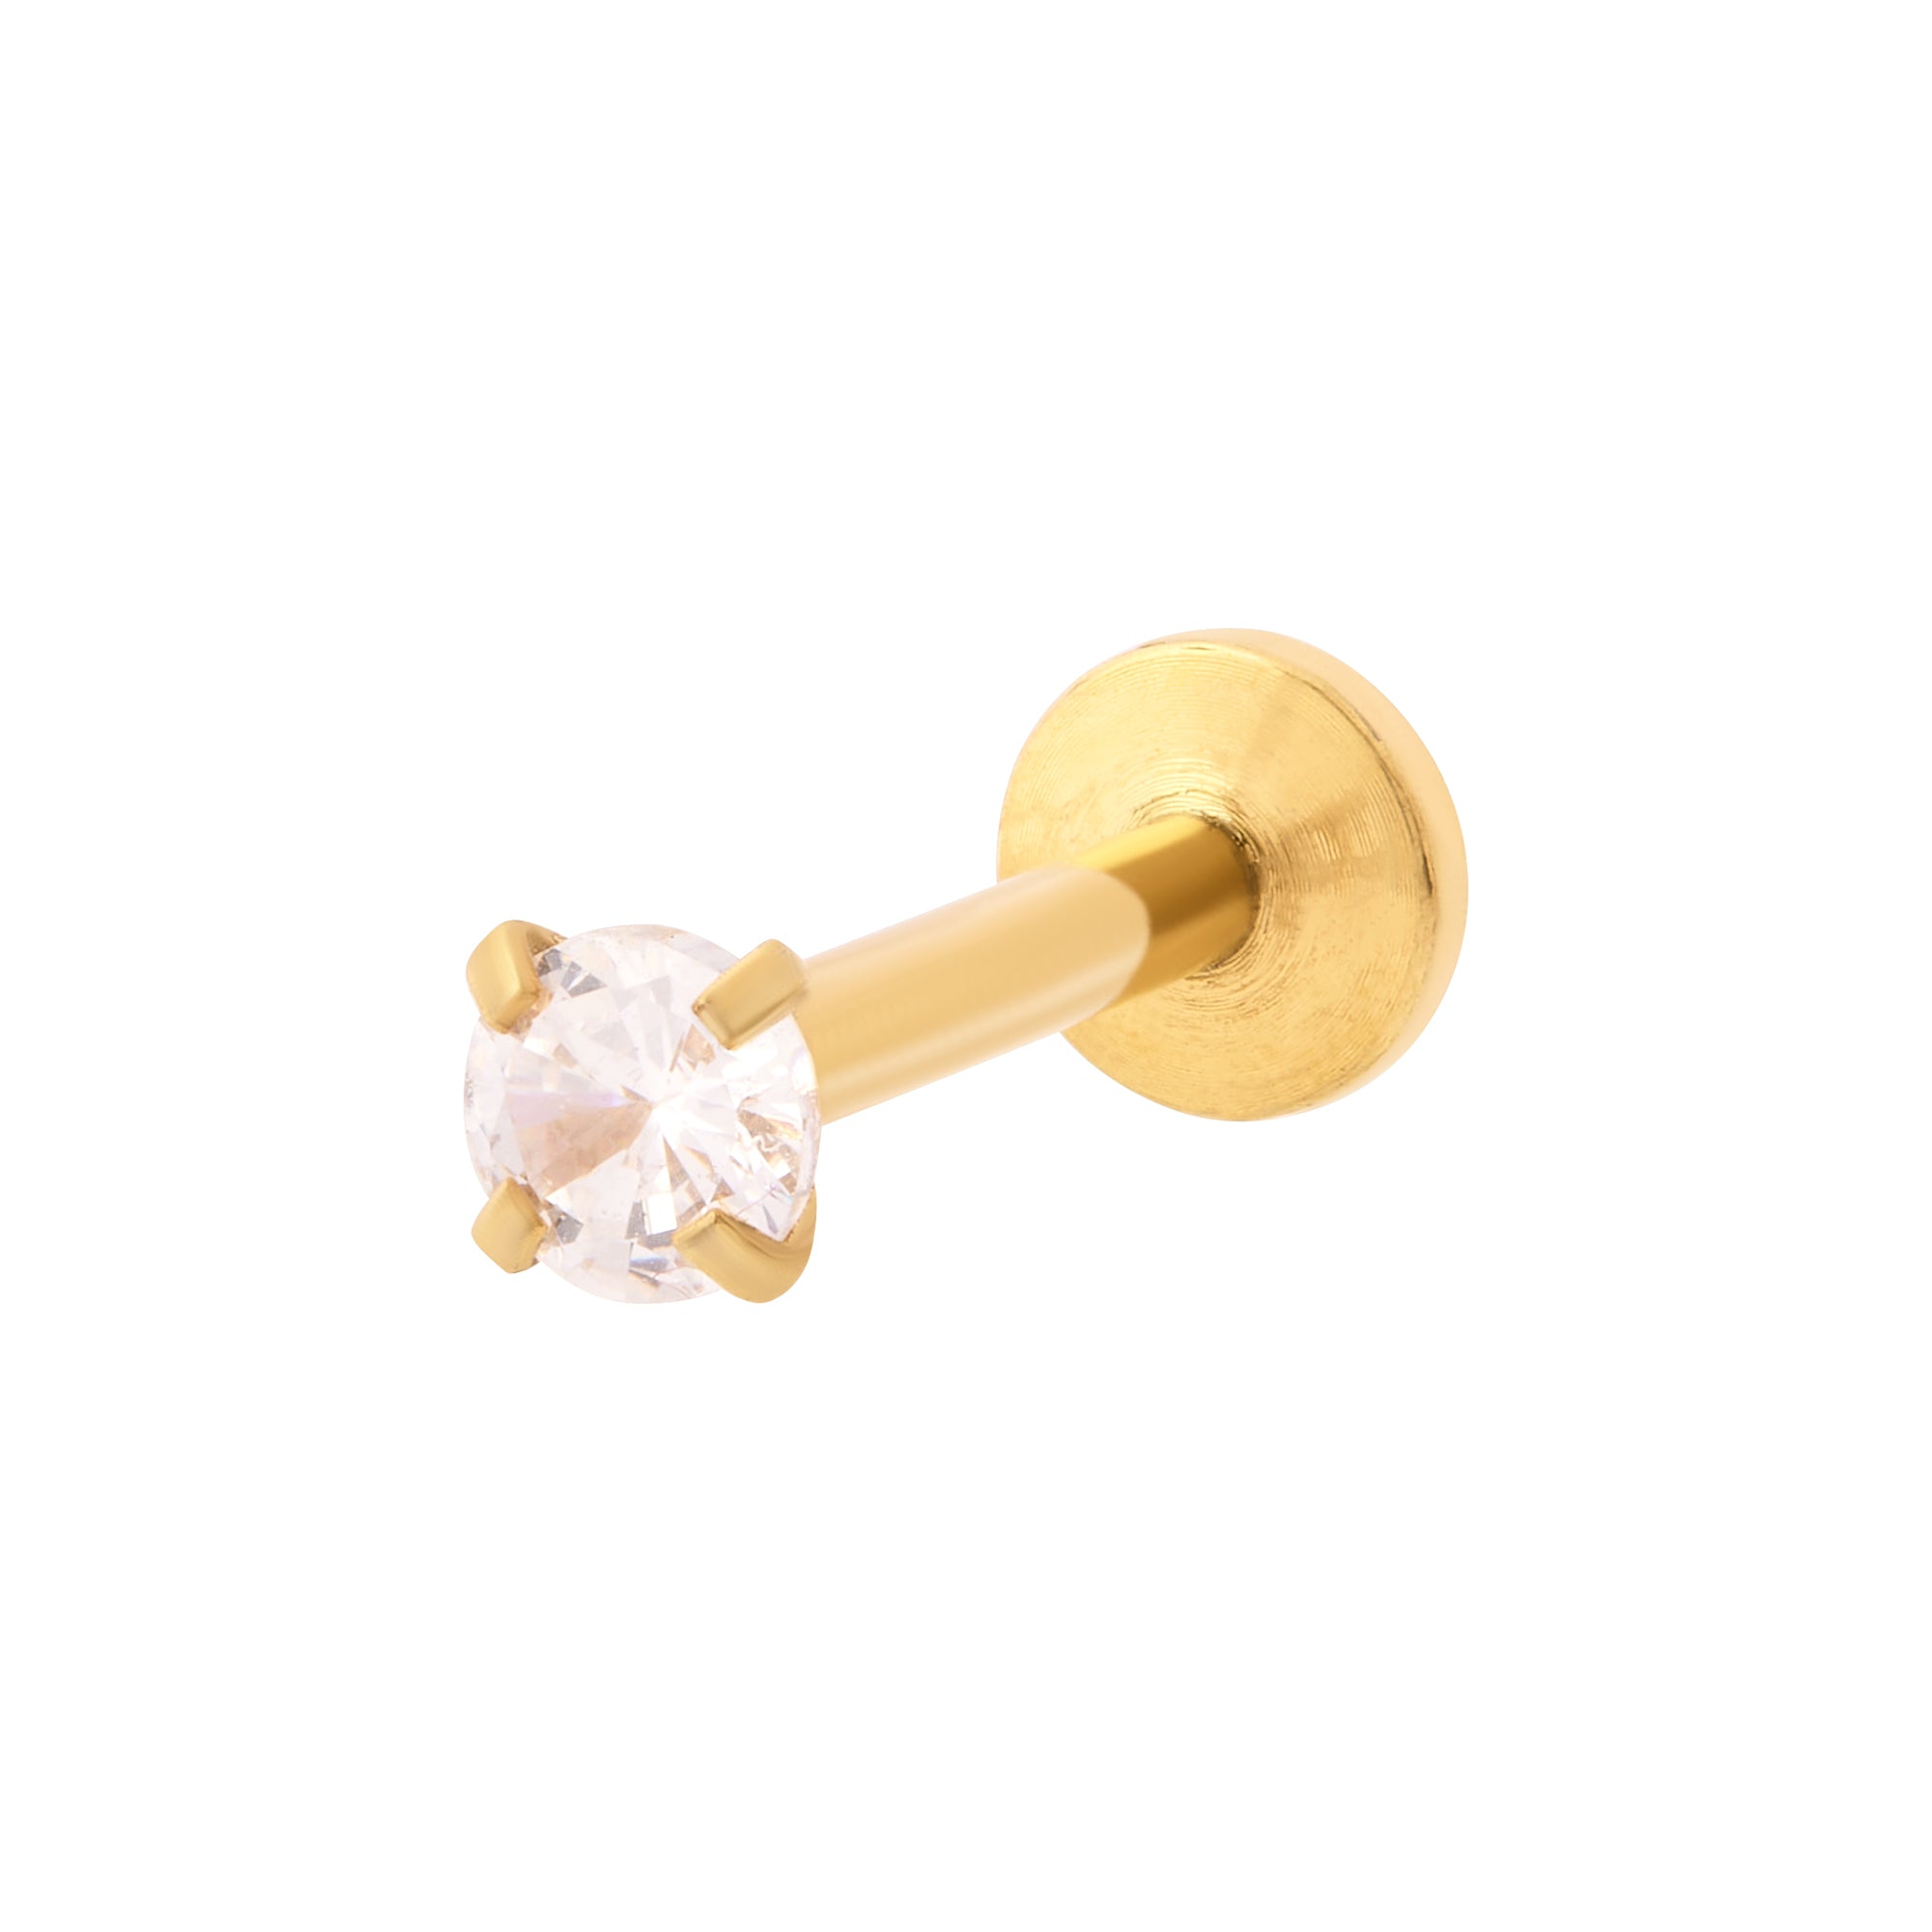 Sparkle Labret Stud Small Gold 6mm-8mm